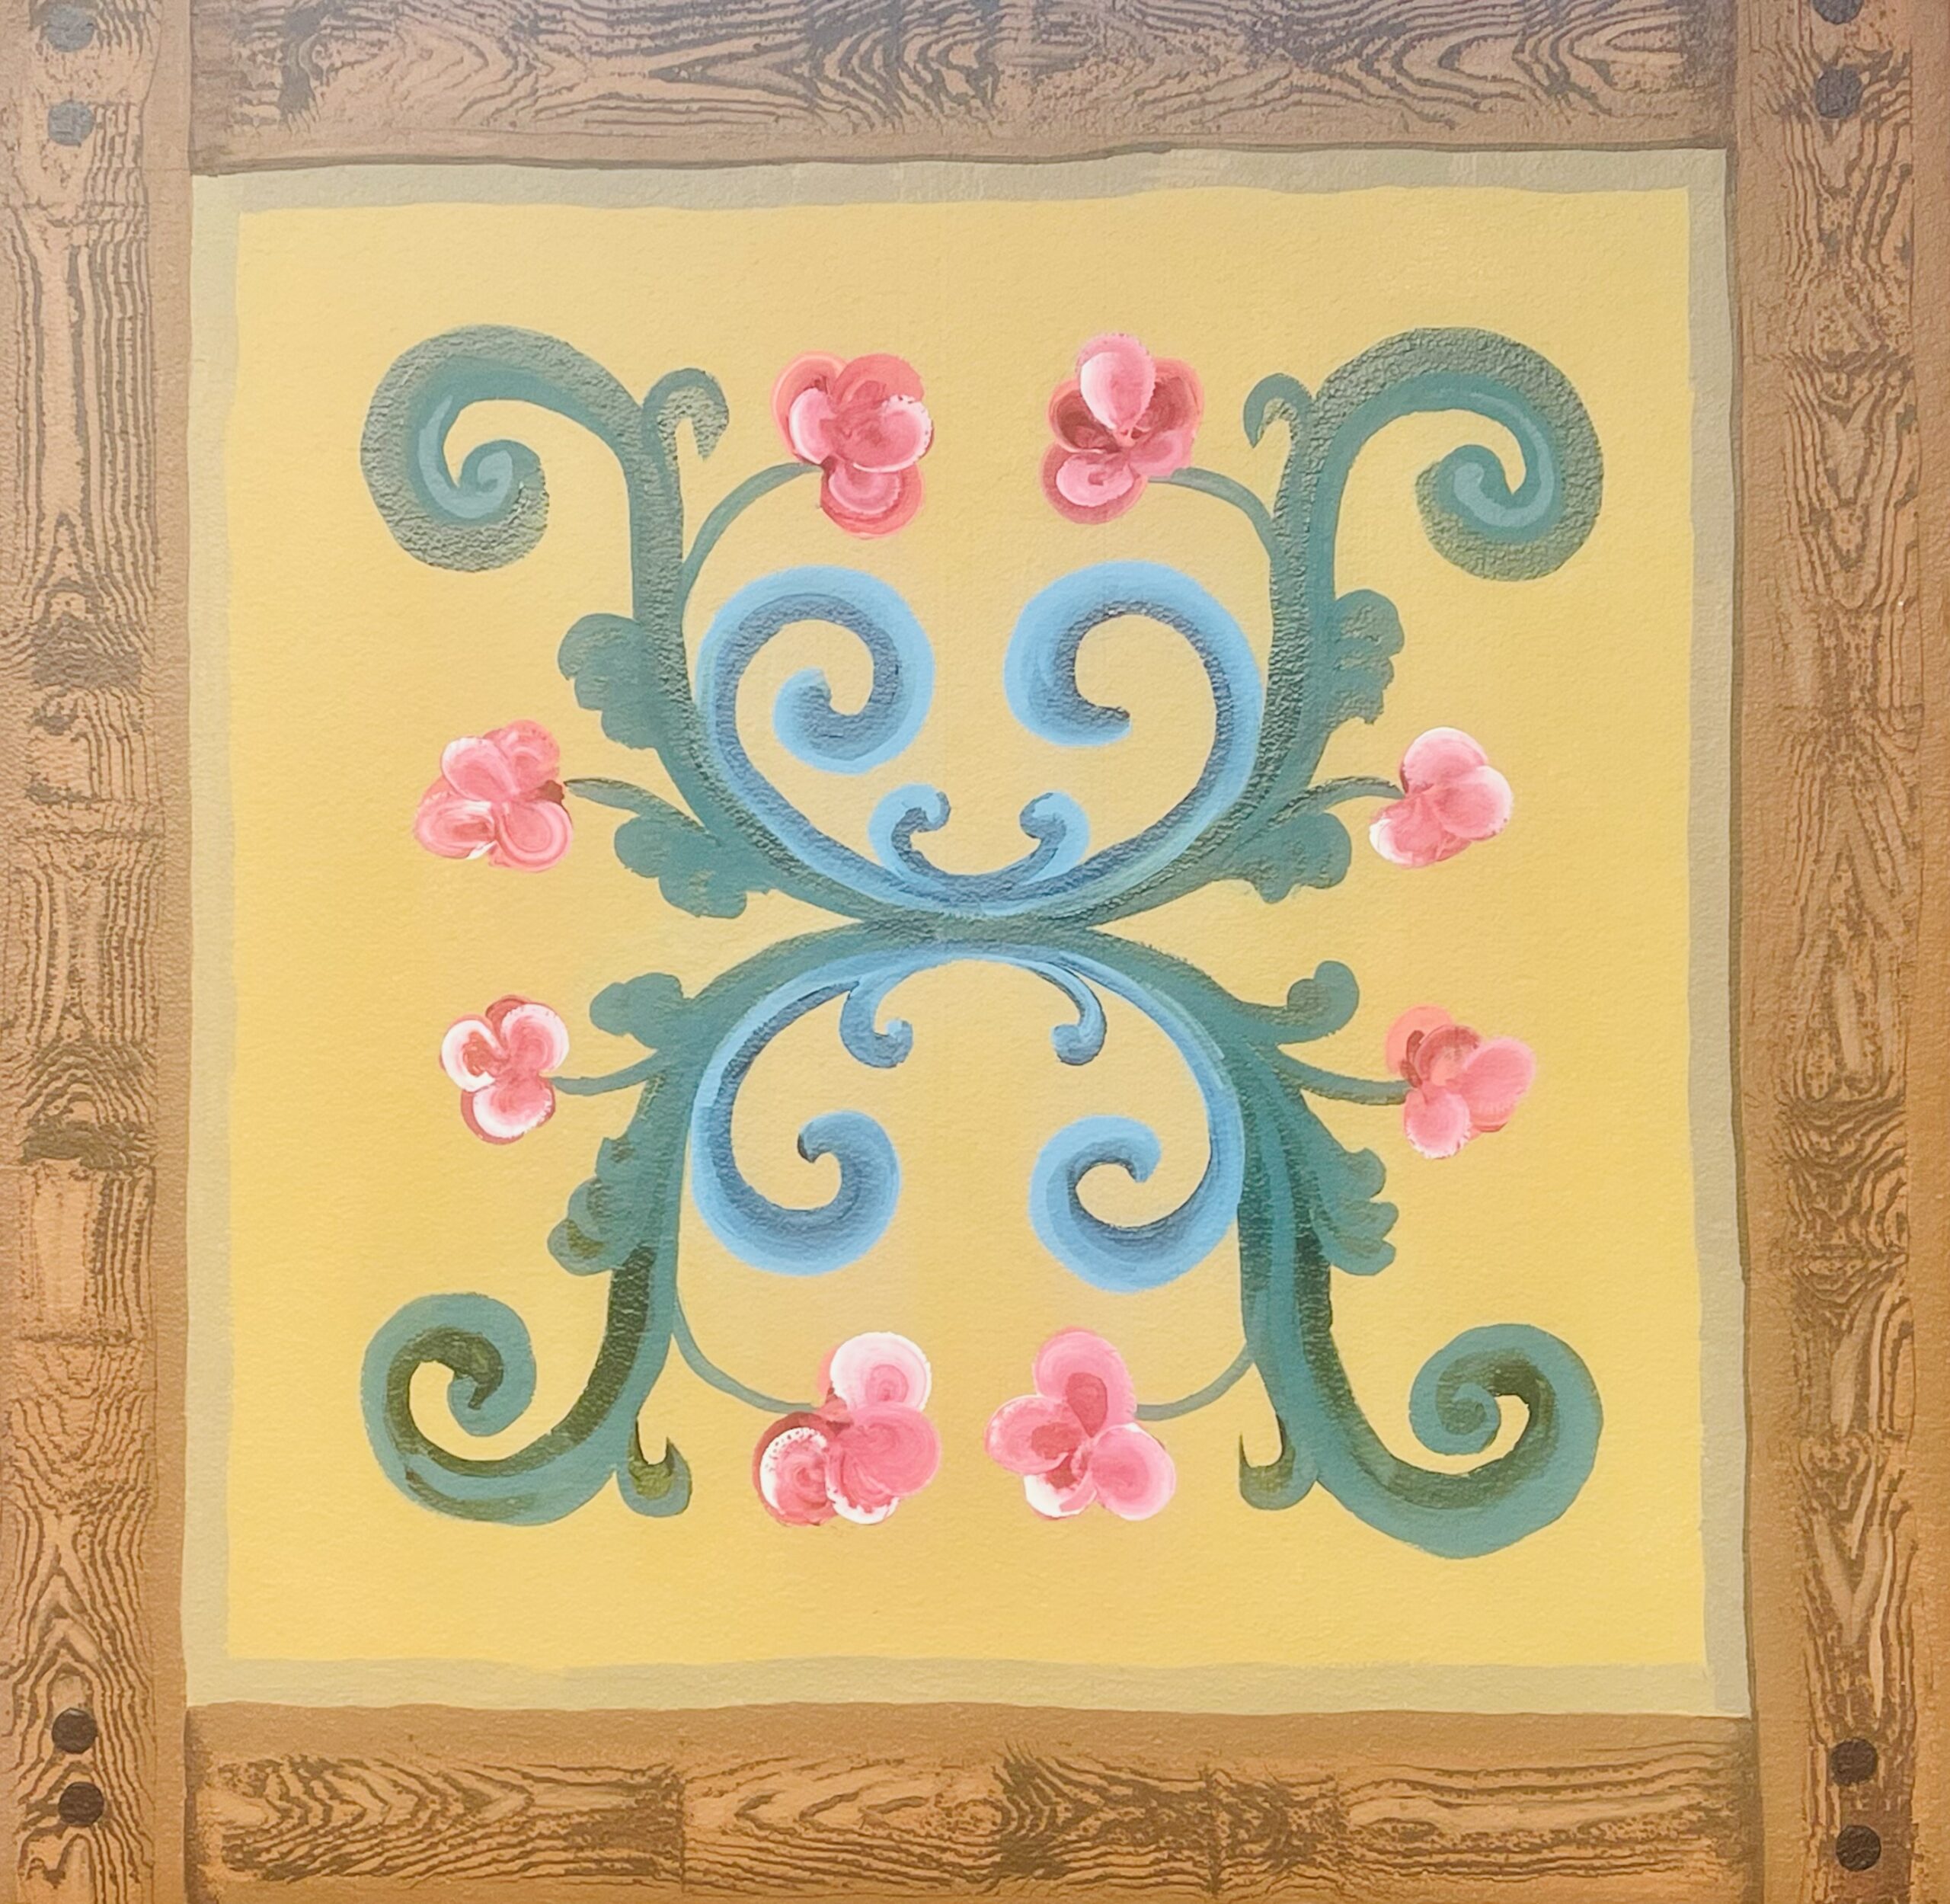 a set design in green blues and pink over a gold backdrop in the style of norwegian rosemaling.